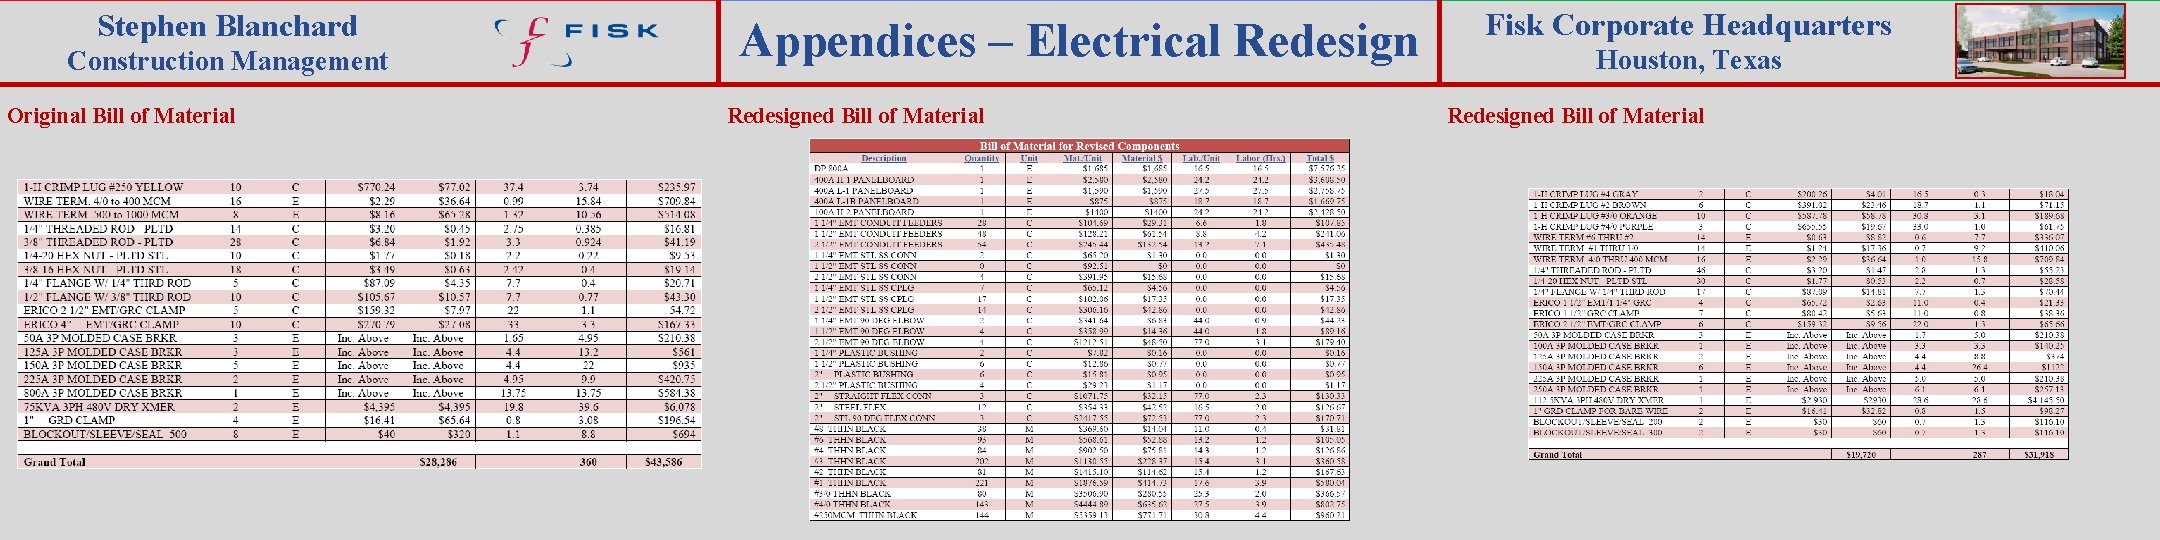 Stephen Blanchard Construction Management Original Bill of Material Appendices – Electrical Redesigned Bill of